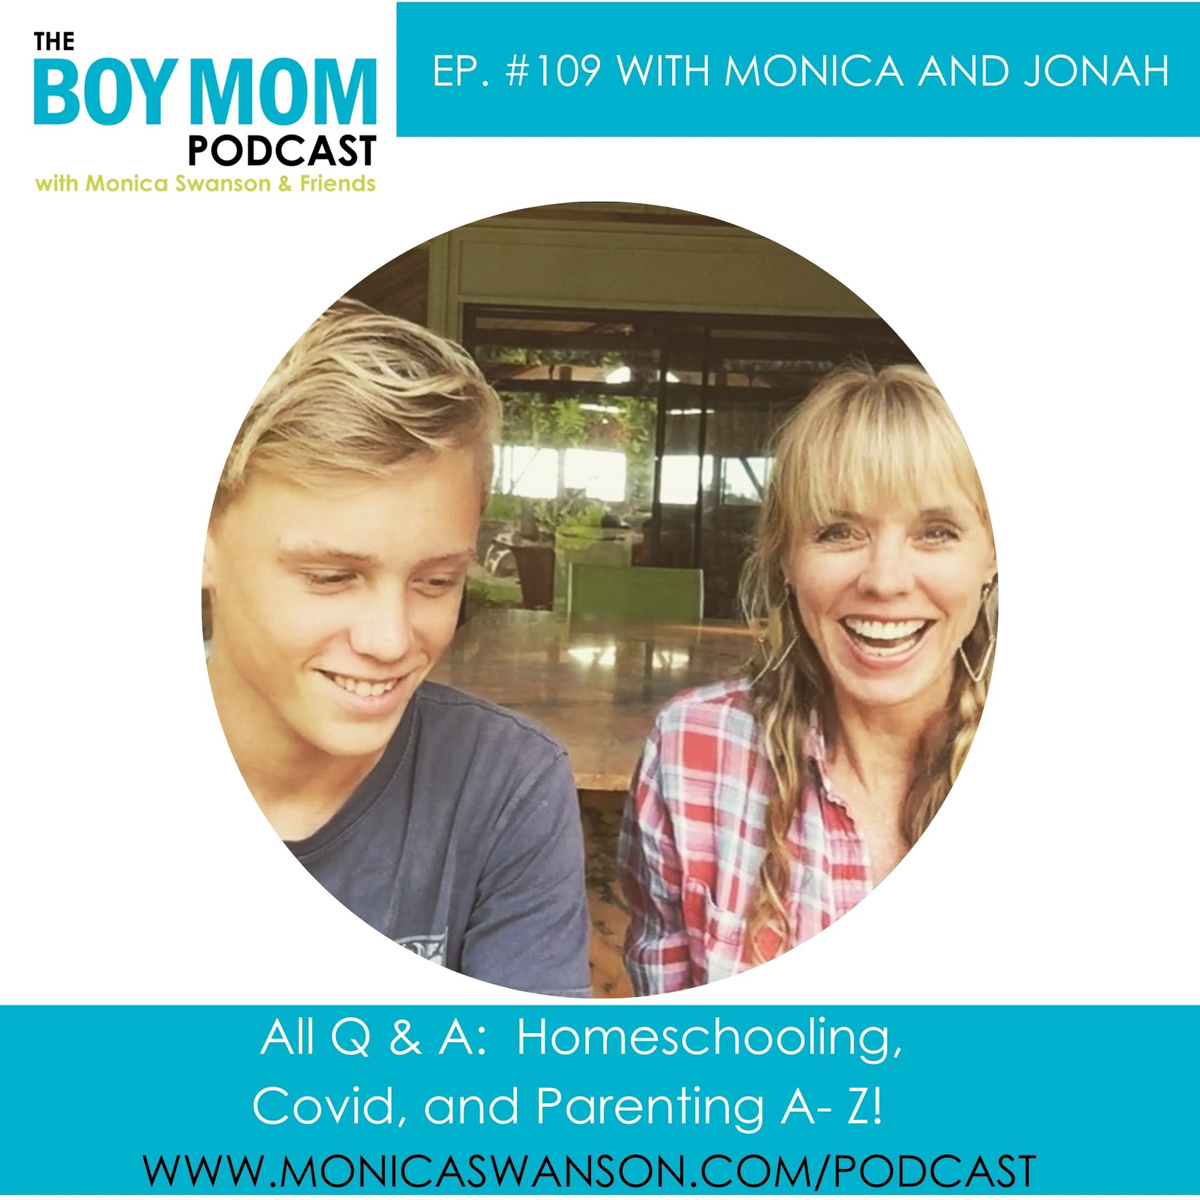 All Q & A: From Homeschooling to the Vaccine, to Parenting A-Z! {Ep.109 with Jonah}